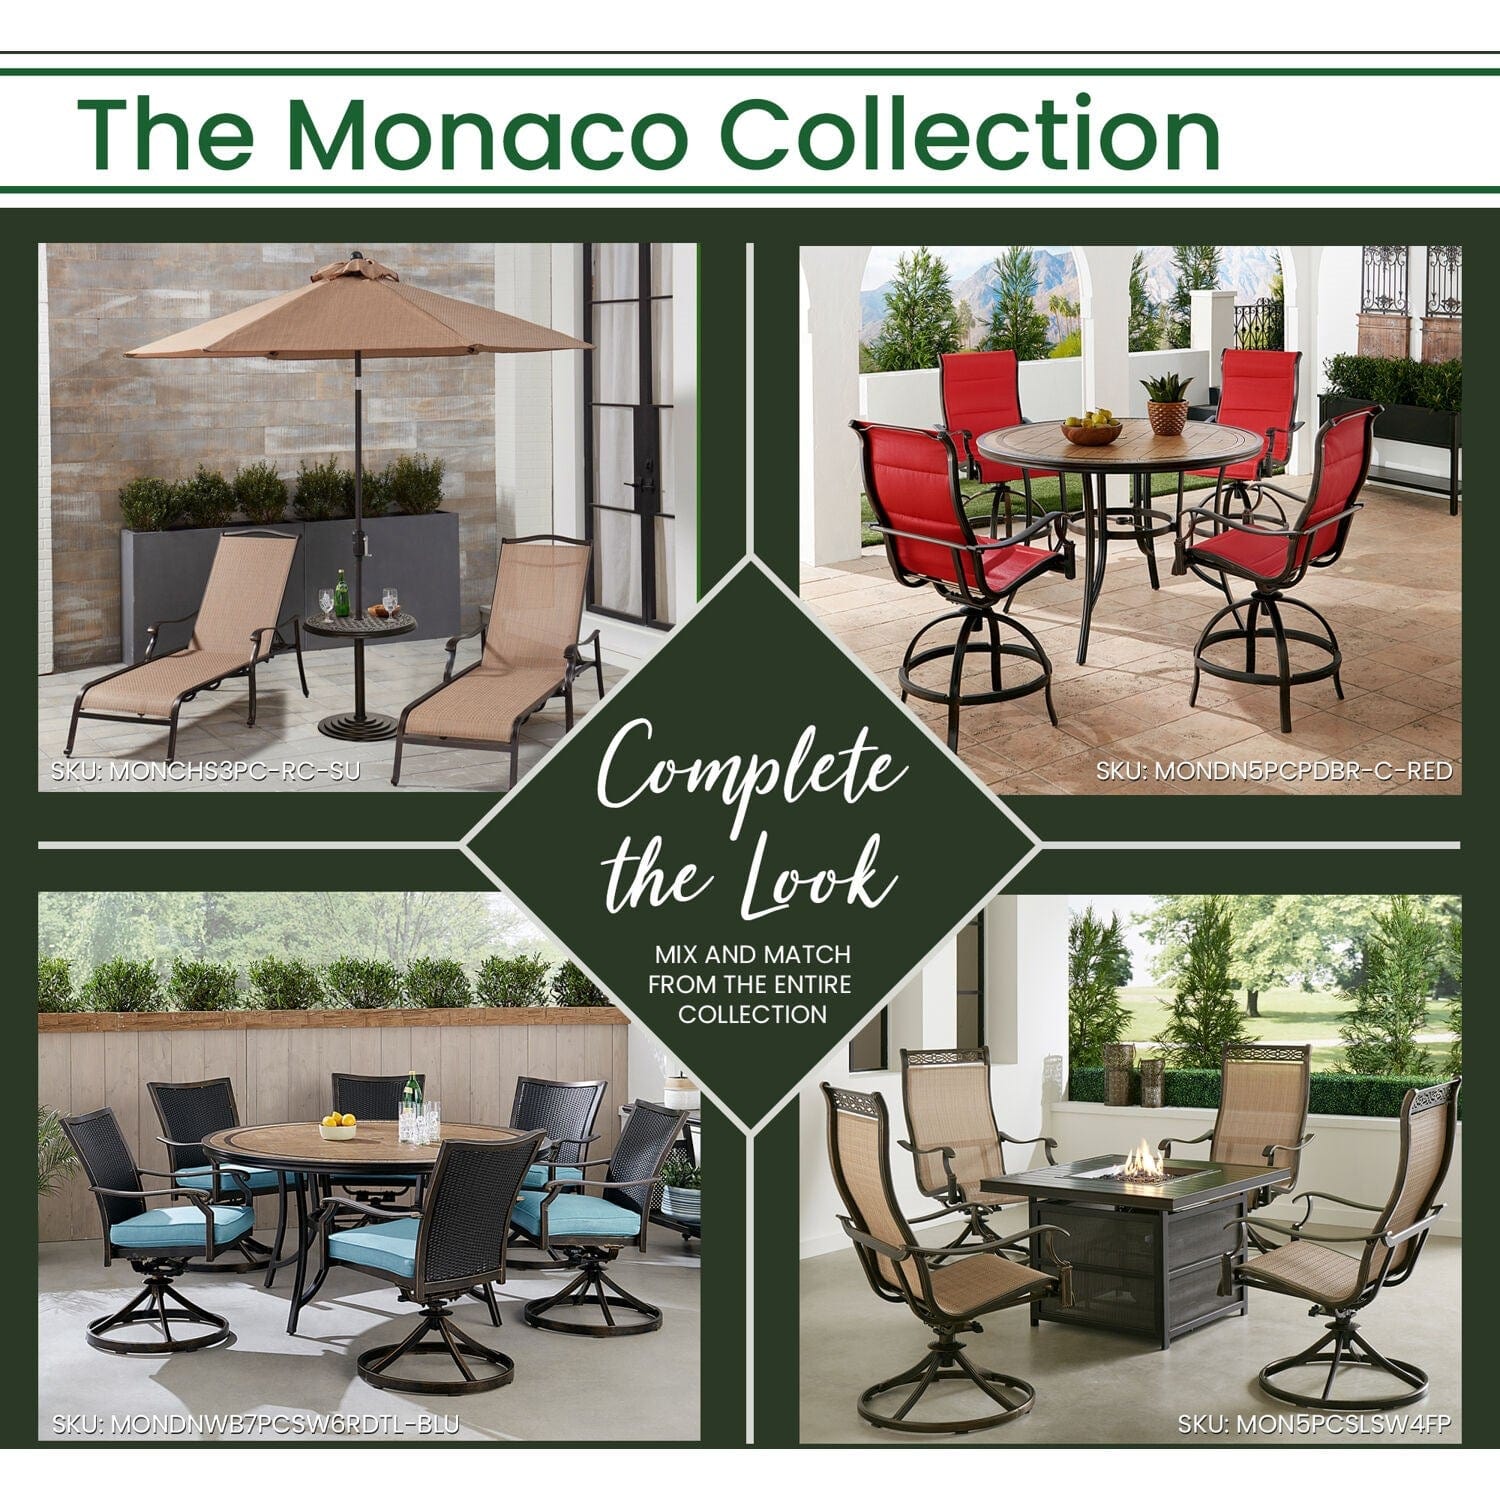 Hanover Outdoor Dining Set Hanover Monaco 7-Piece Dining Set with Six Swivel Rockers, a 68 x 40 in. Dining Table, 9 Ft. Table Umbrella, and Umbrella Stand | MONDN7PCSW6-SU